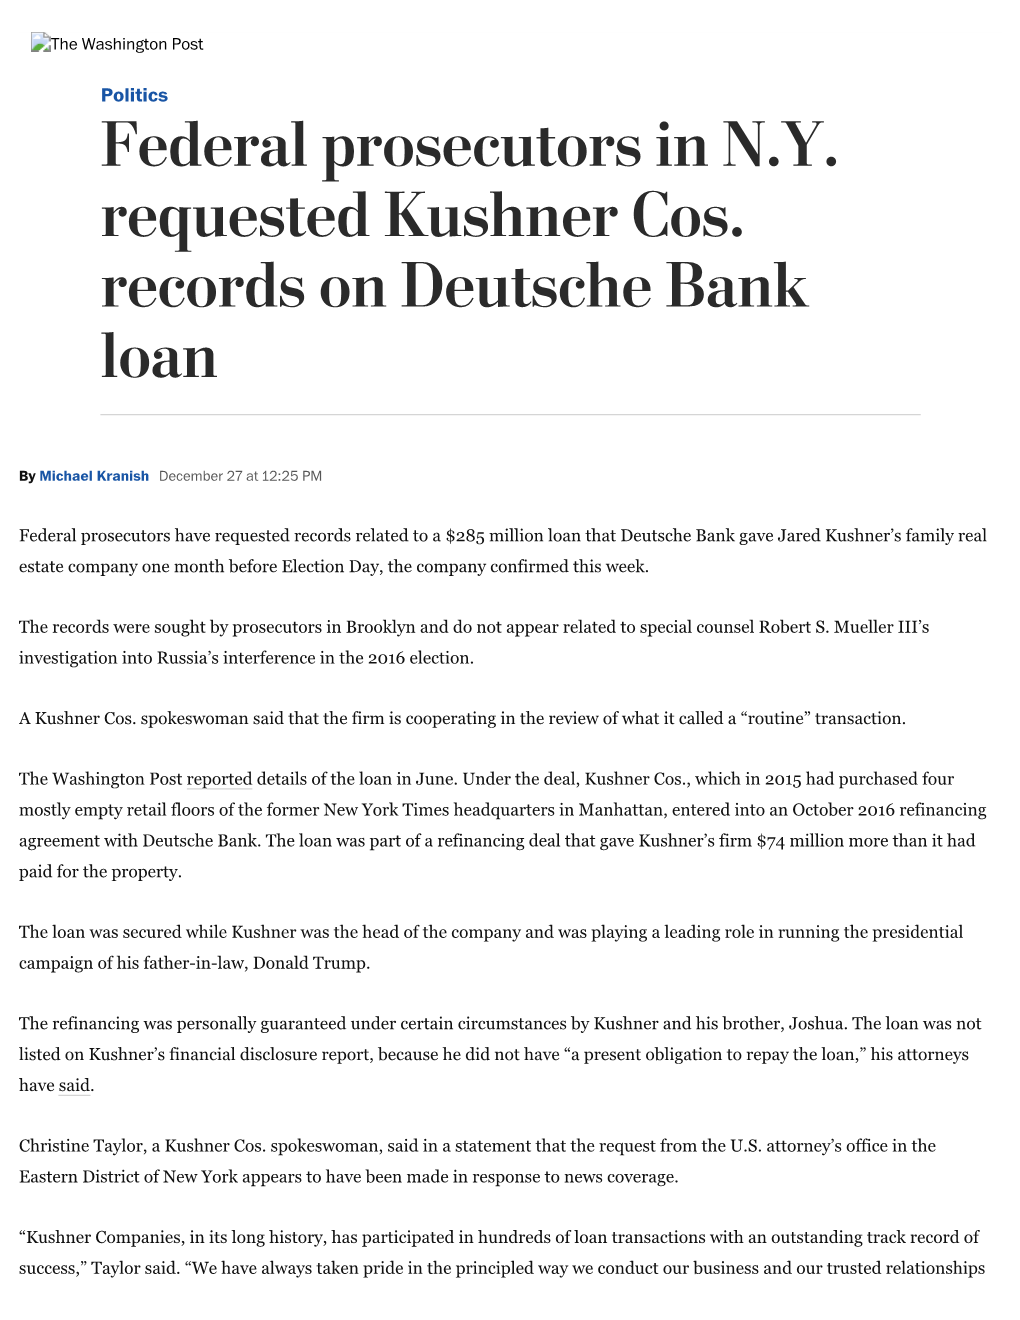 Federal Prosecutors in N.Y. Requested Kushner Cos. Records on Deutsche Bank Loan